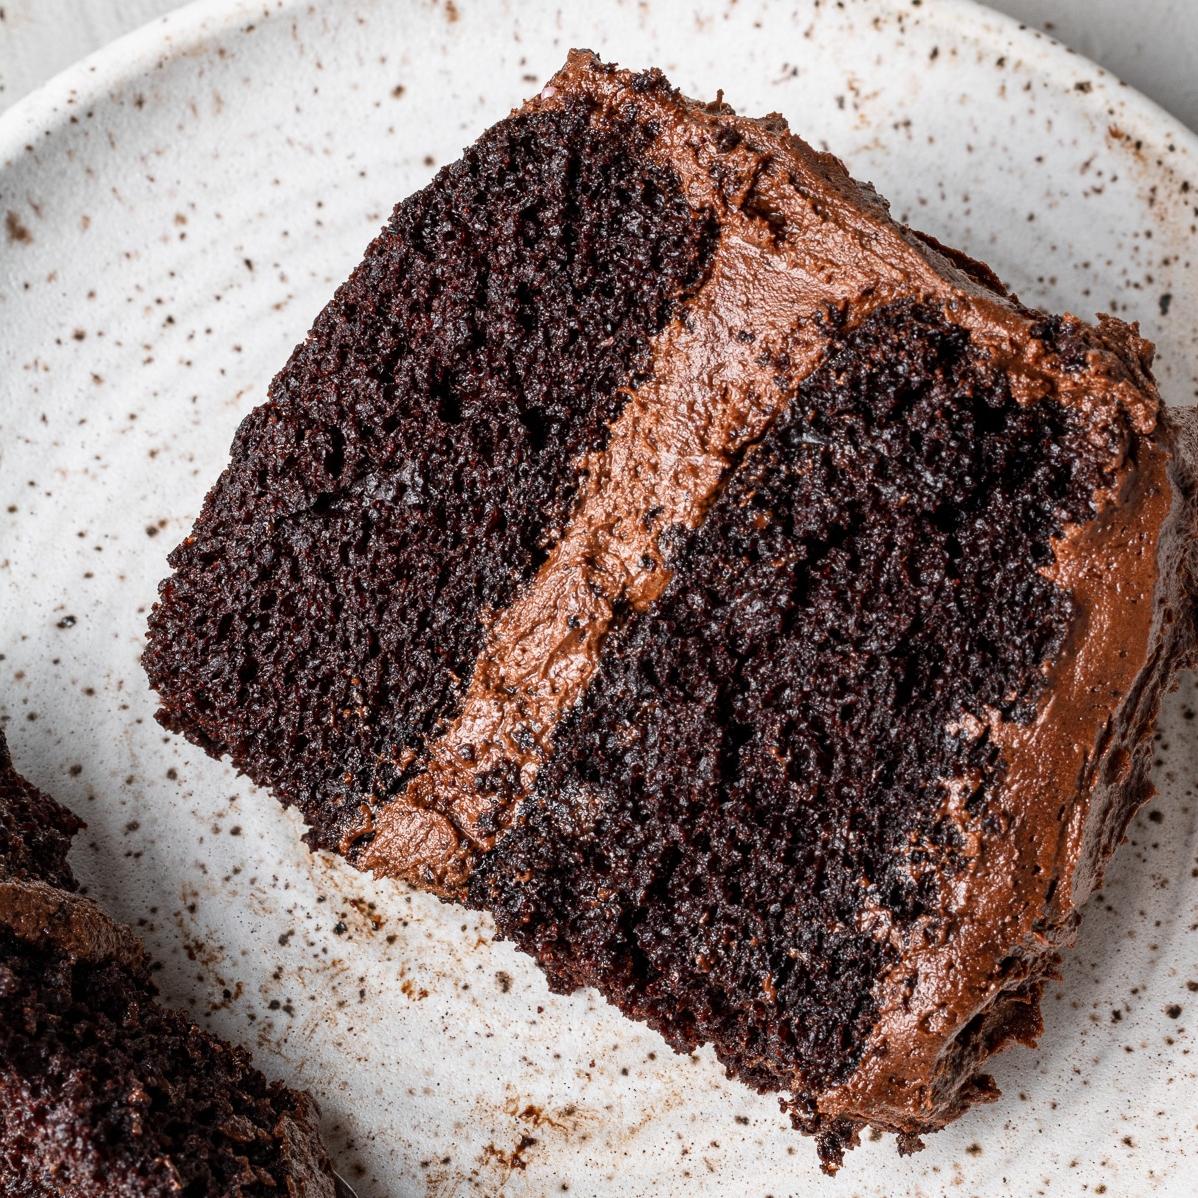  Dig in to this rich and moist chocolate cake made without any dairy!